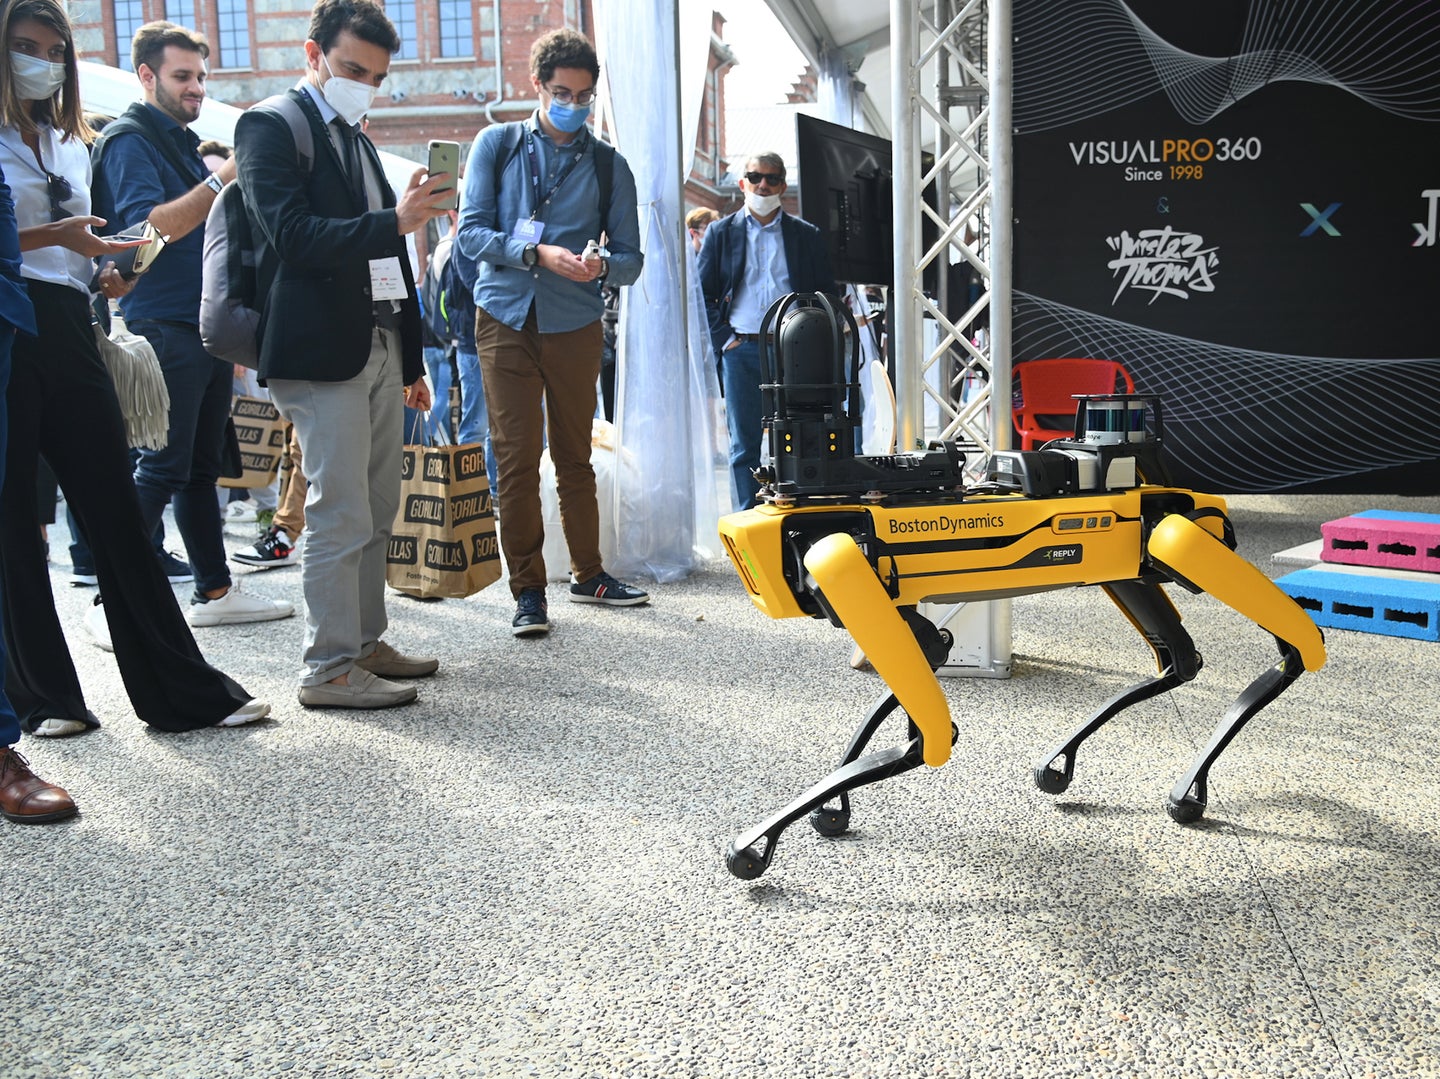 Onlookers film and photograph Boston Dynamics' Spot robot at a showcase